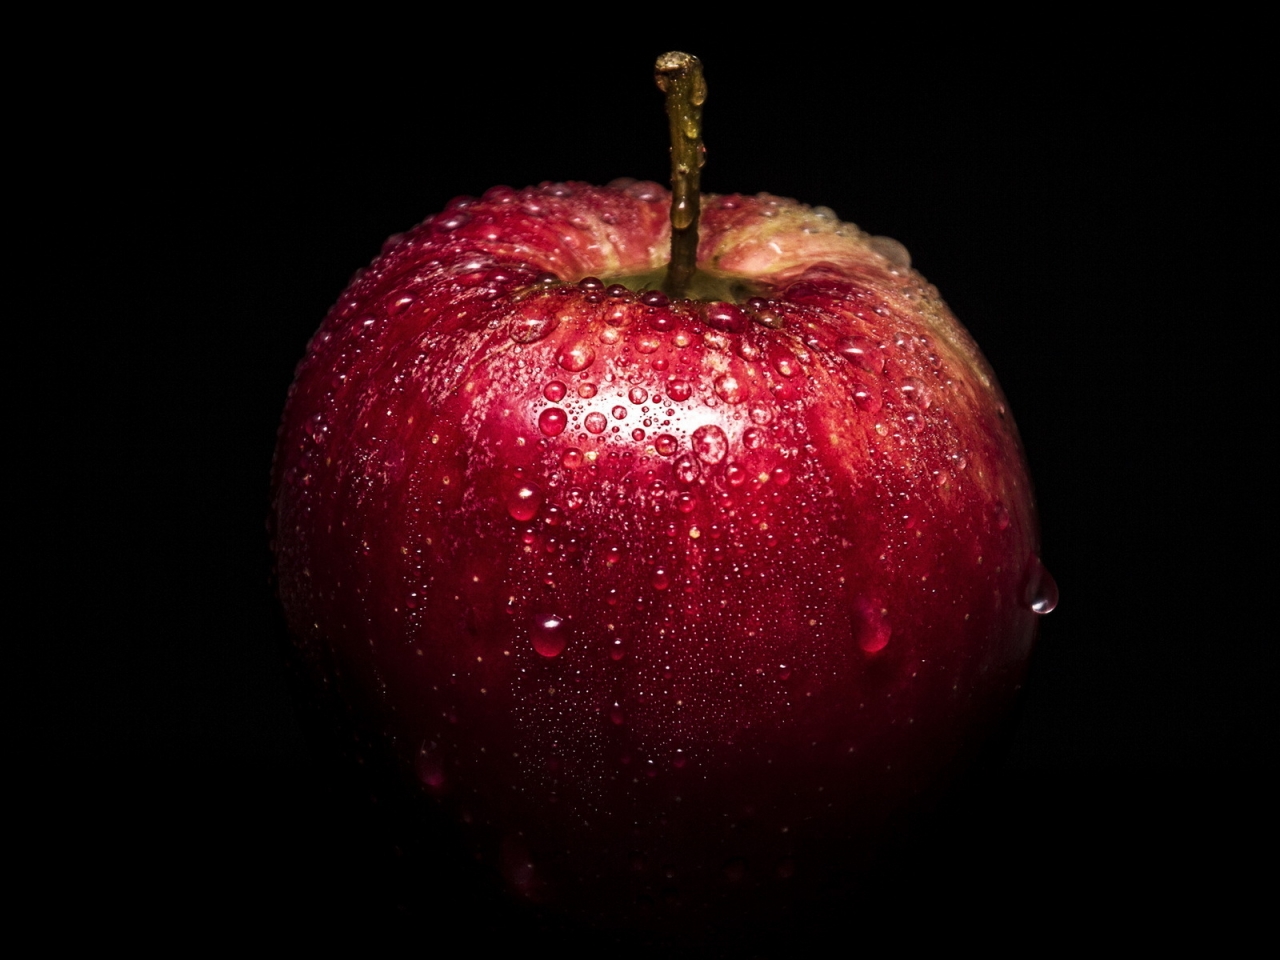 Red Delicious Apple for 1280 x 960 resolution